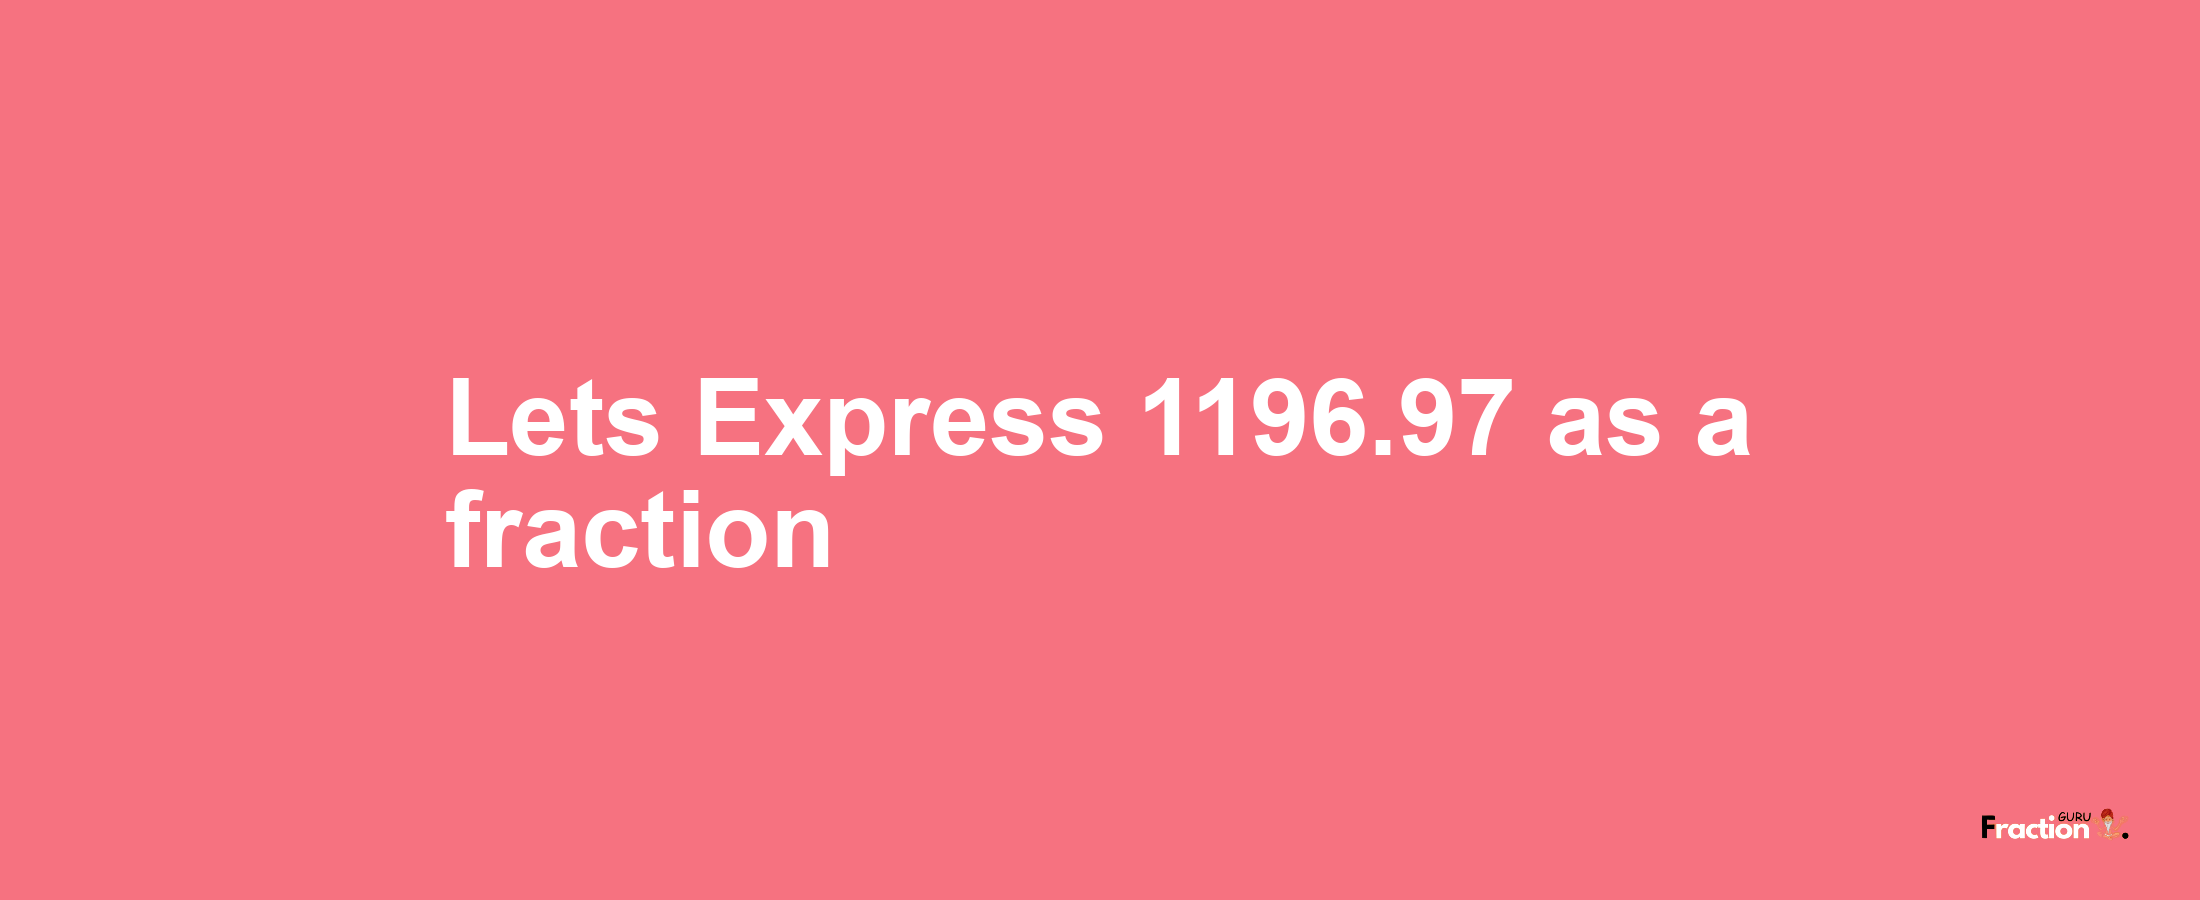 Lets Express 1196.97 as afraction